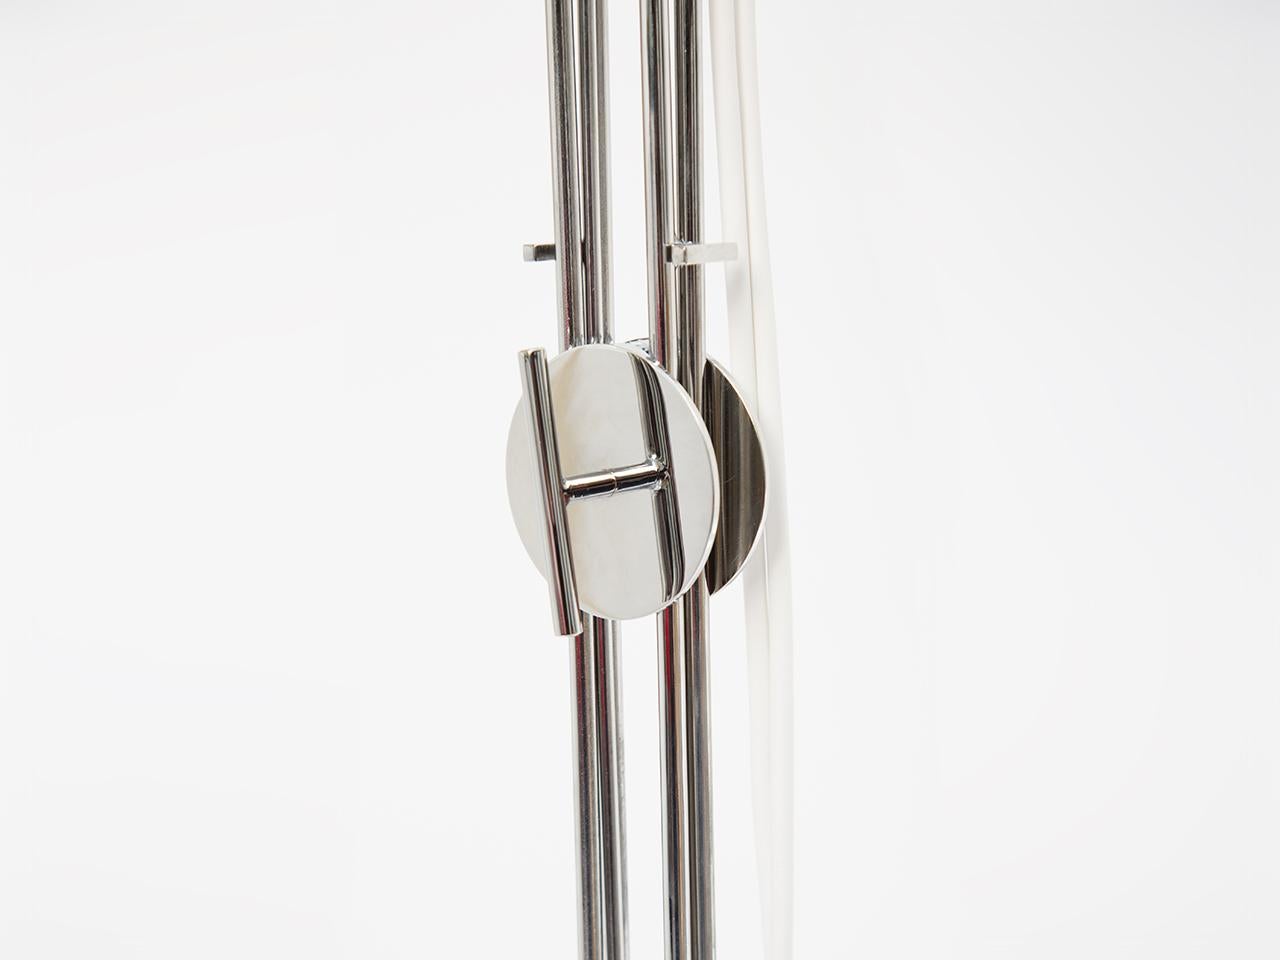 French Olivier Mourgue Standing Lamp in Brushed Stainless Steel For Sale